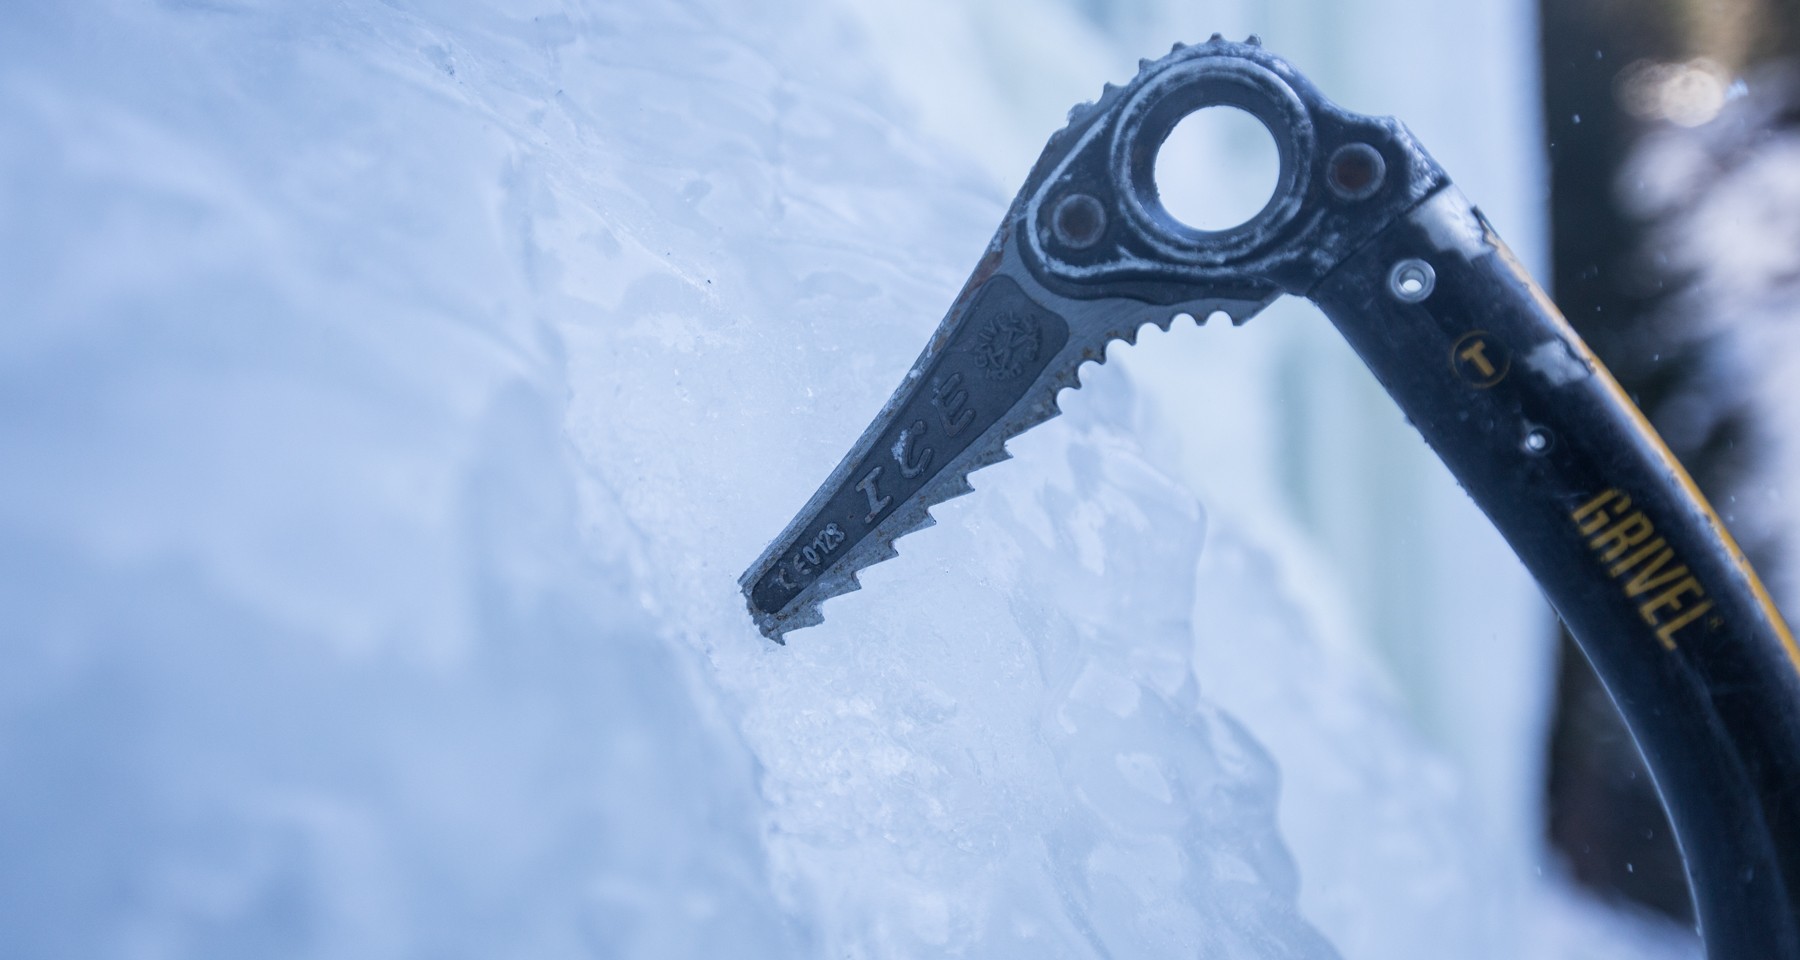 Ice climbing course for Beginners